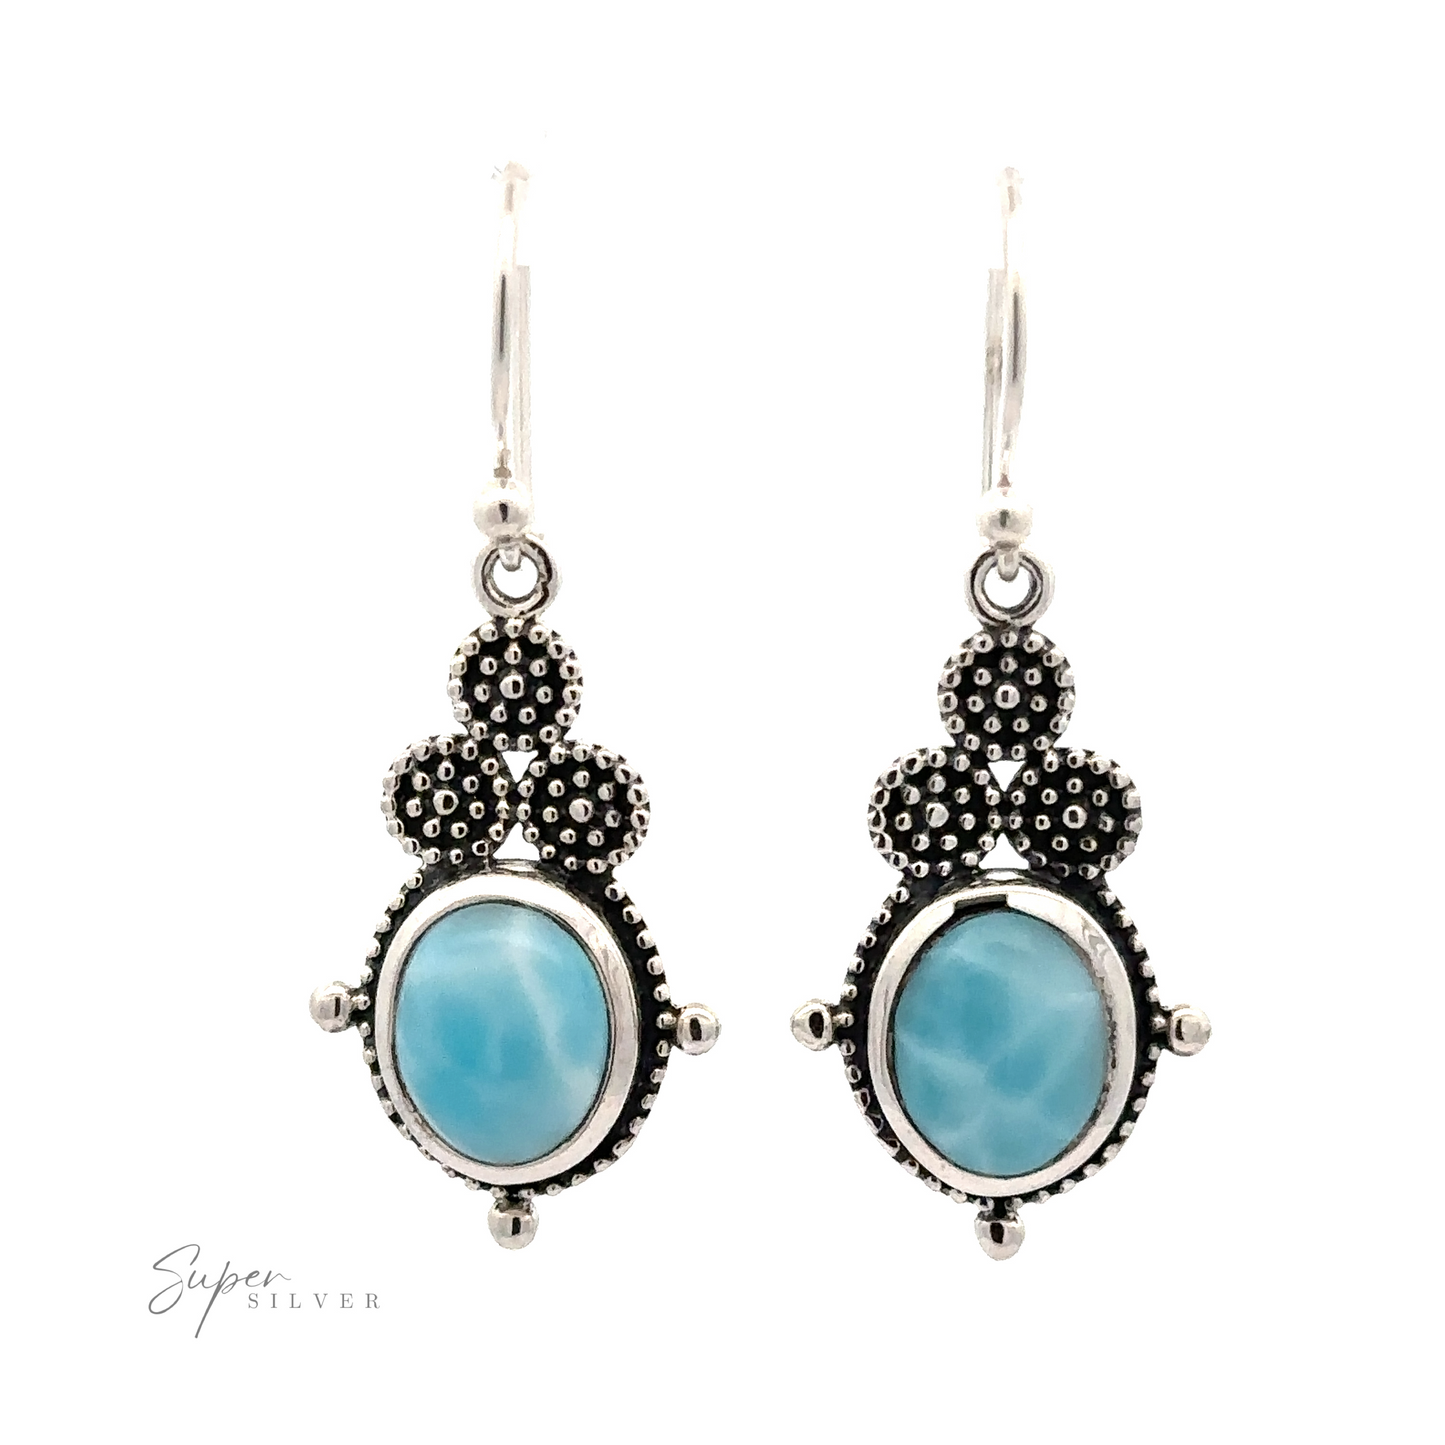 
                  
                    A pair of Beaded Oval Larimar Dangle Earrings with blue oval Larimar stones set in detailed sterling silver designs, featuring a small cluster of textured silver dots at the top and an inscription "Super Silver" at the bottom left.
                  
                